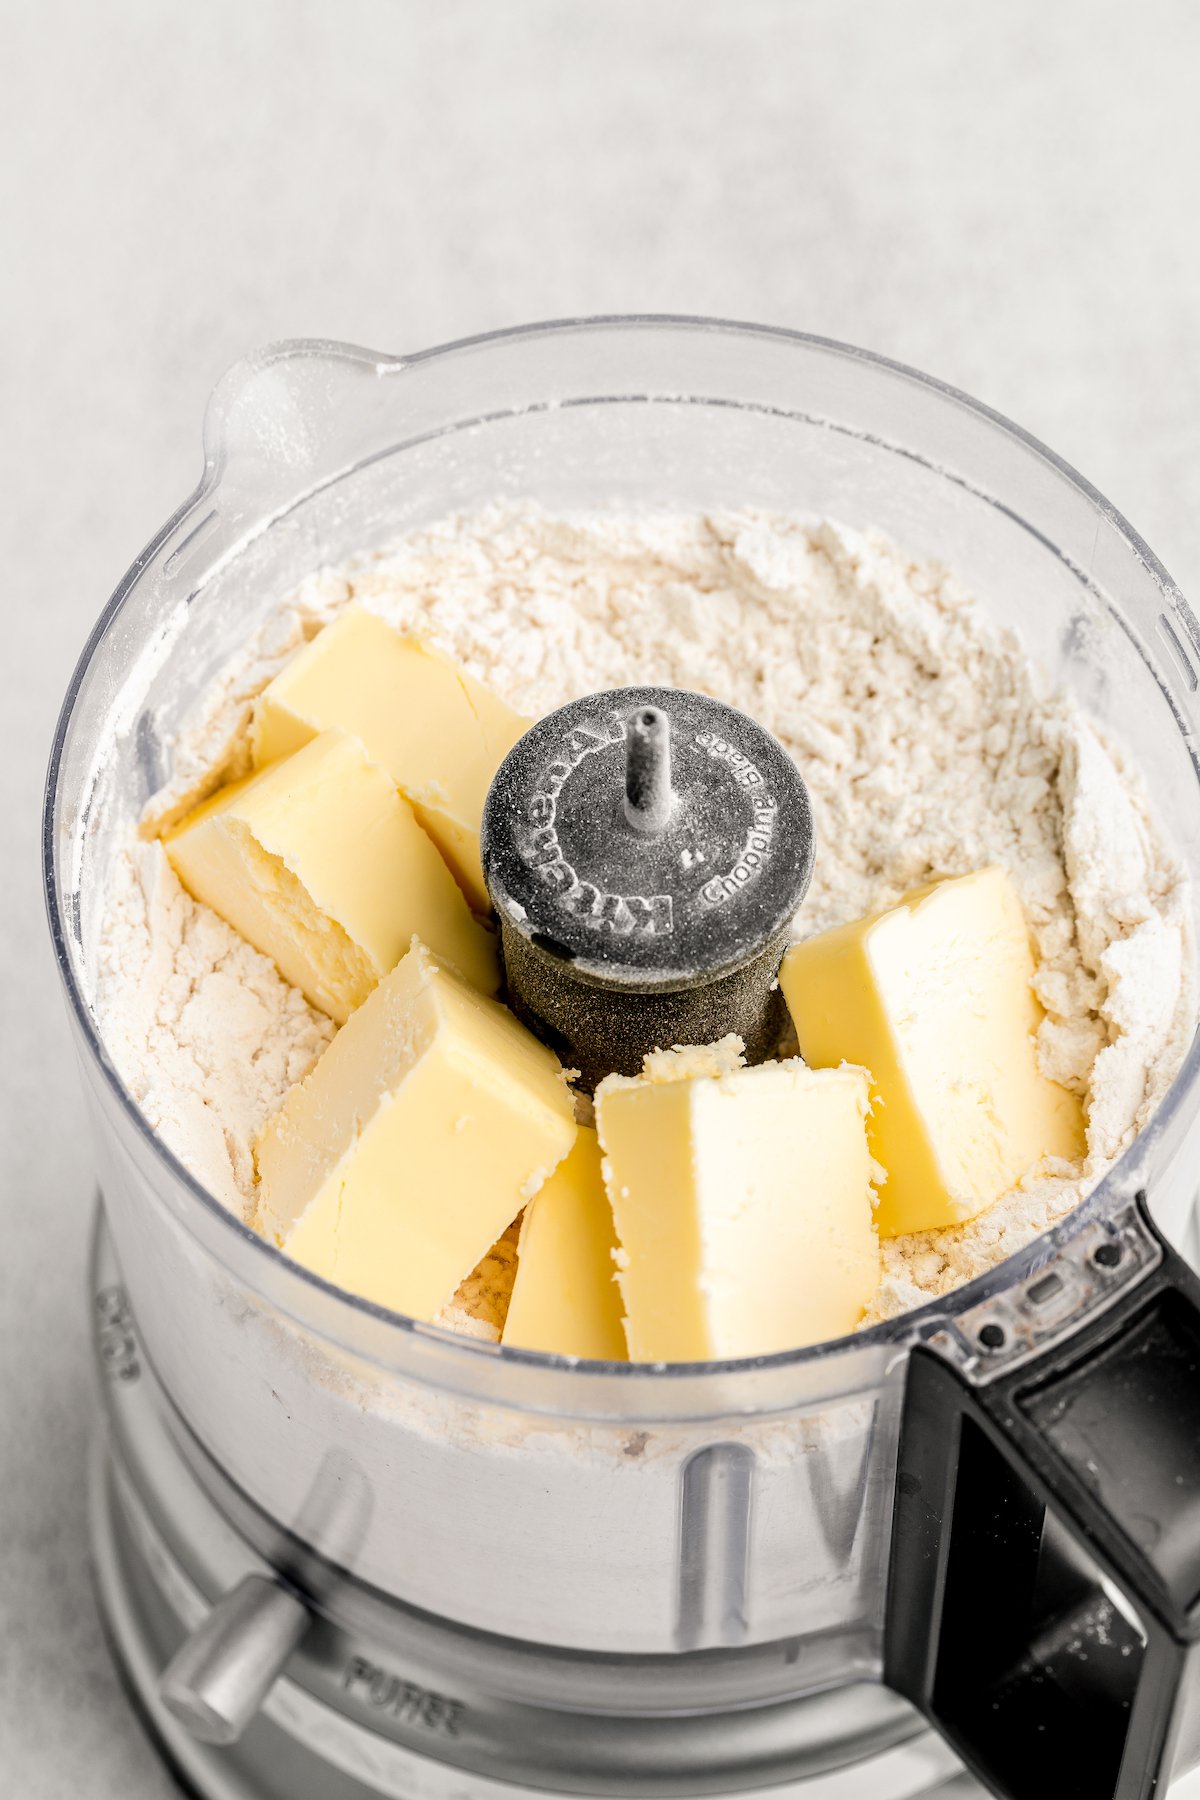 Butter sticks are added to the flour mixture in a food processor.